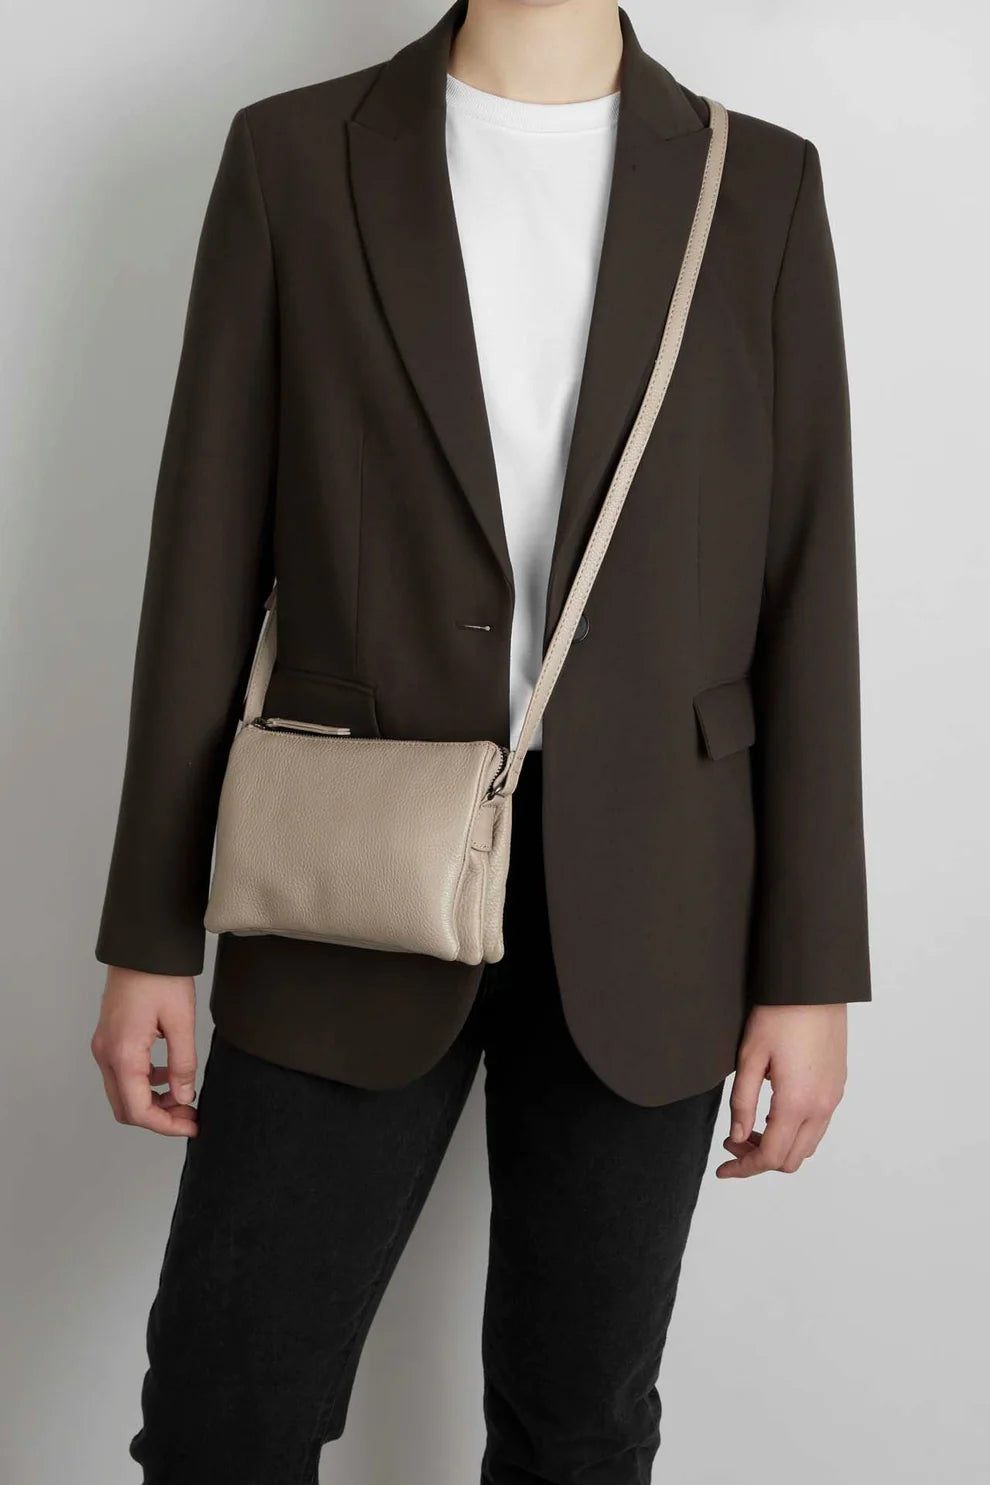 Person wearing a dark blazer and black jeans with a white t-shirt, accessorized with a light beige Markberg Grain Crossbody Bag.